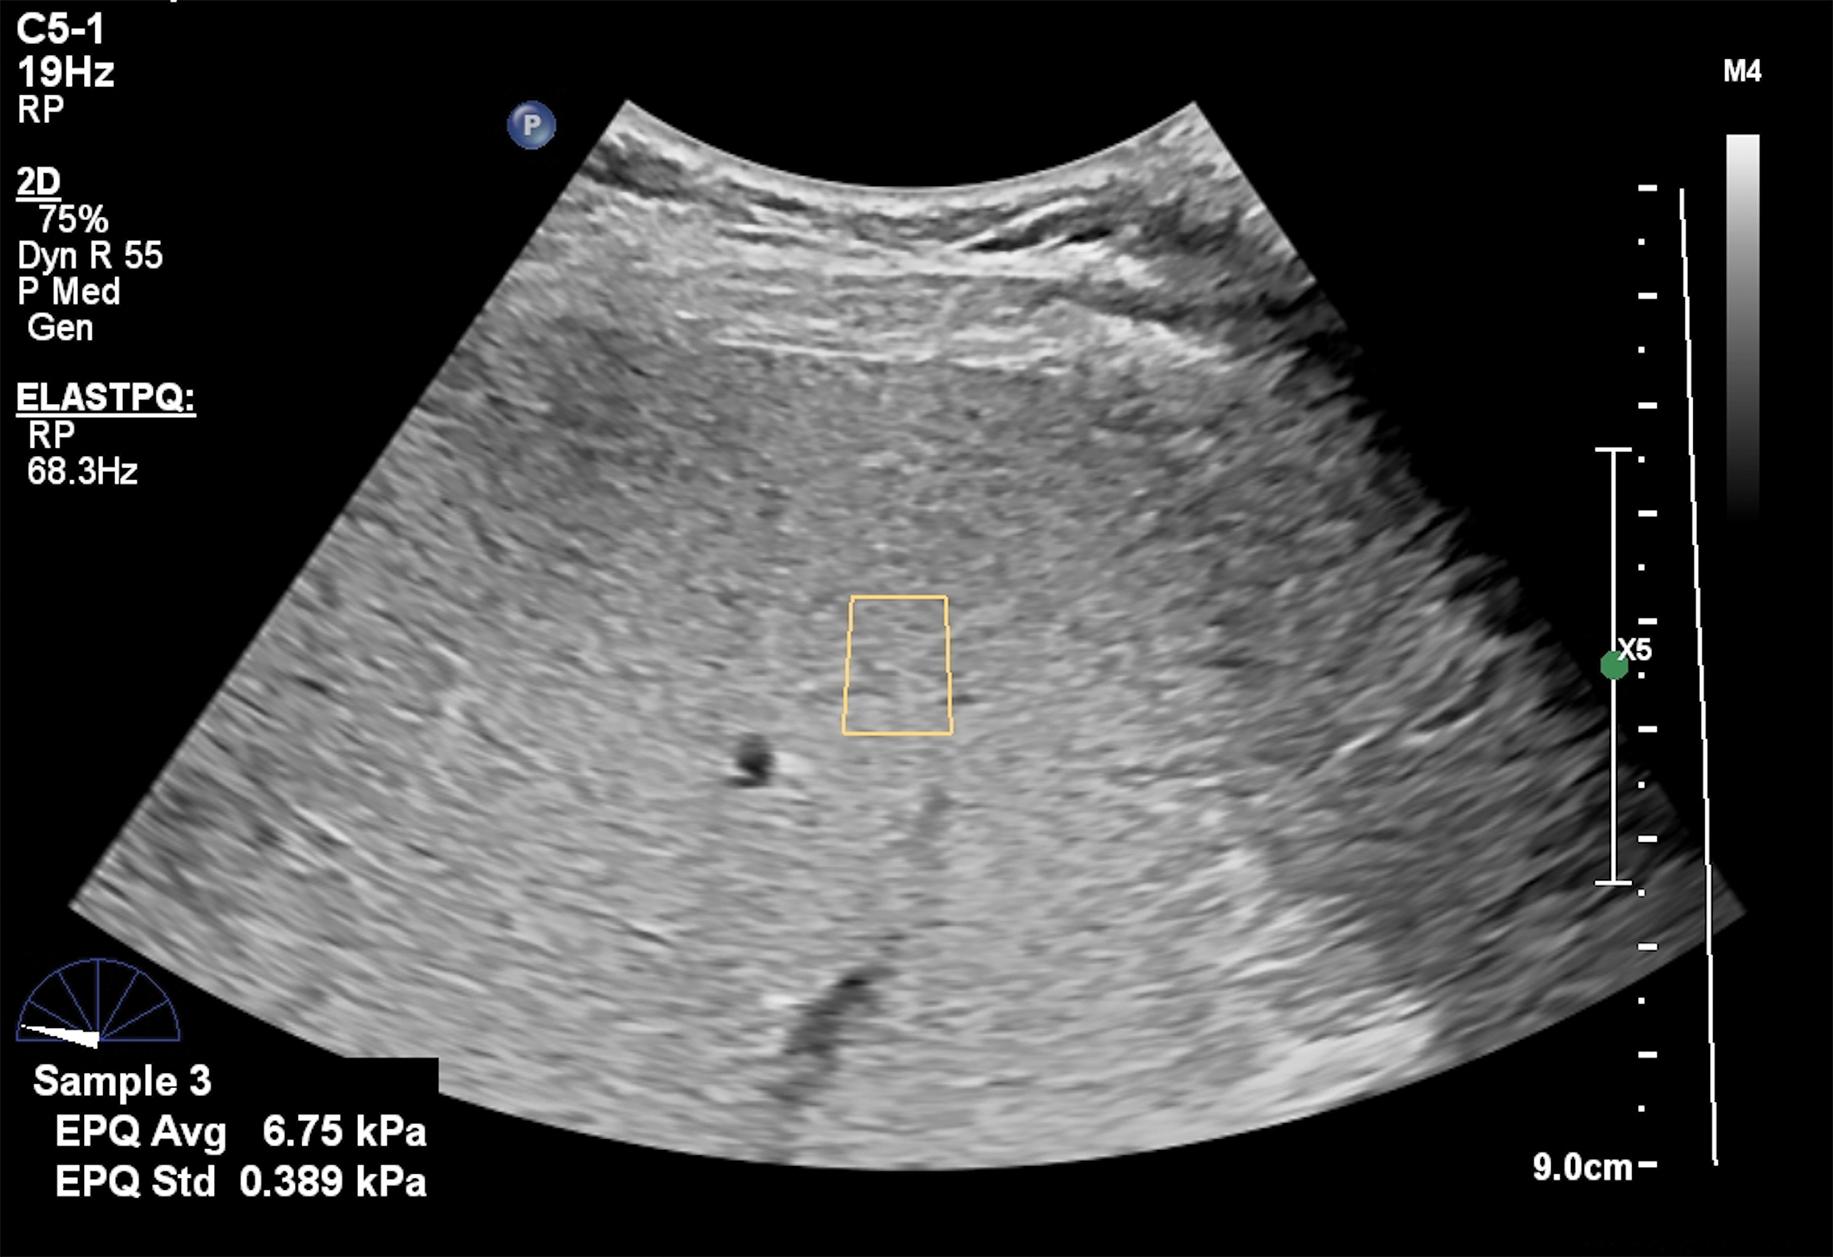 Fig. 7.6, Asymptomatic 42-year-old woman with nonalcoholic fatty liver disease and alanine aminotransferase value of 52 IU/L. The liver stiffness obtained with a point shear wave elastography technique (ElastPQ, Epiq7 ultrasound system, Philips Medical Systems) is 6.75 kPa, a value that may exclude significant fibrosis. The manufacturer quality criterion is the standard deviation of each measurement shown below the average value on the left bottom side of the image. It must be up to 30% of the average value.